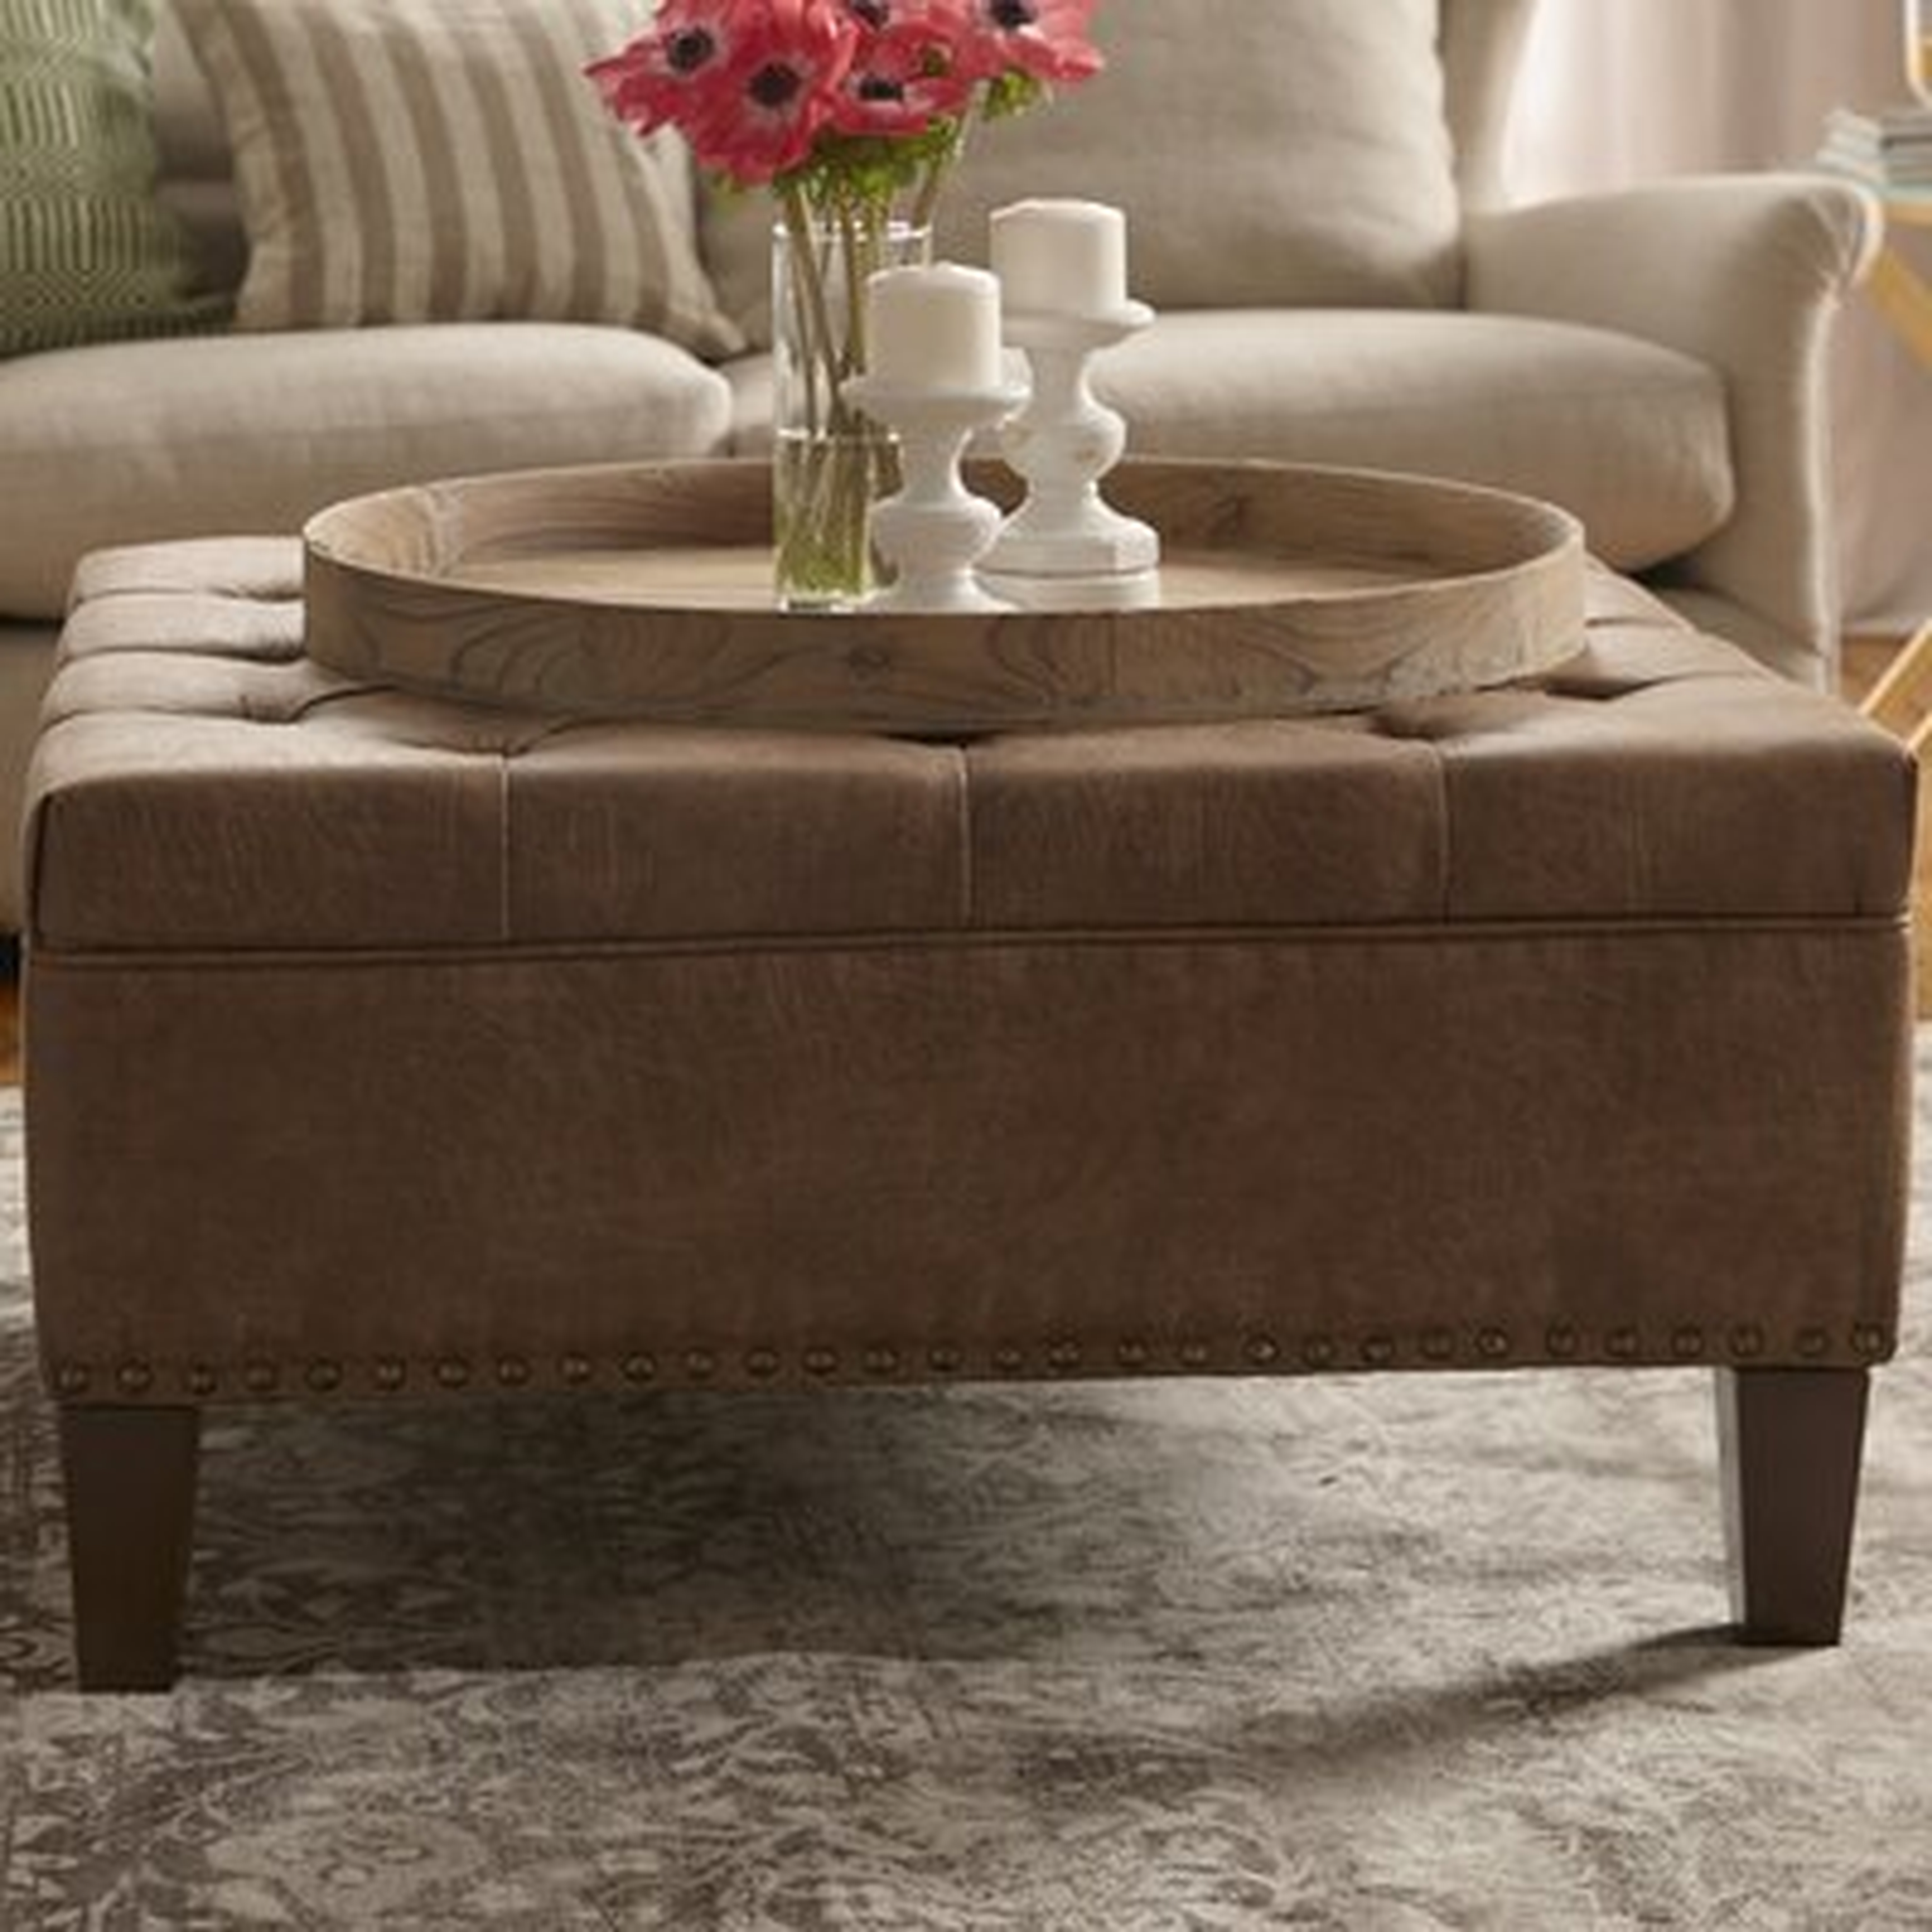 Sigler 35.5" Wide Faux Leather Tufted Square Cocktail Ottoman - Wayfair